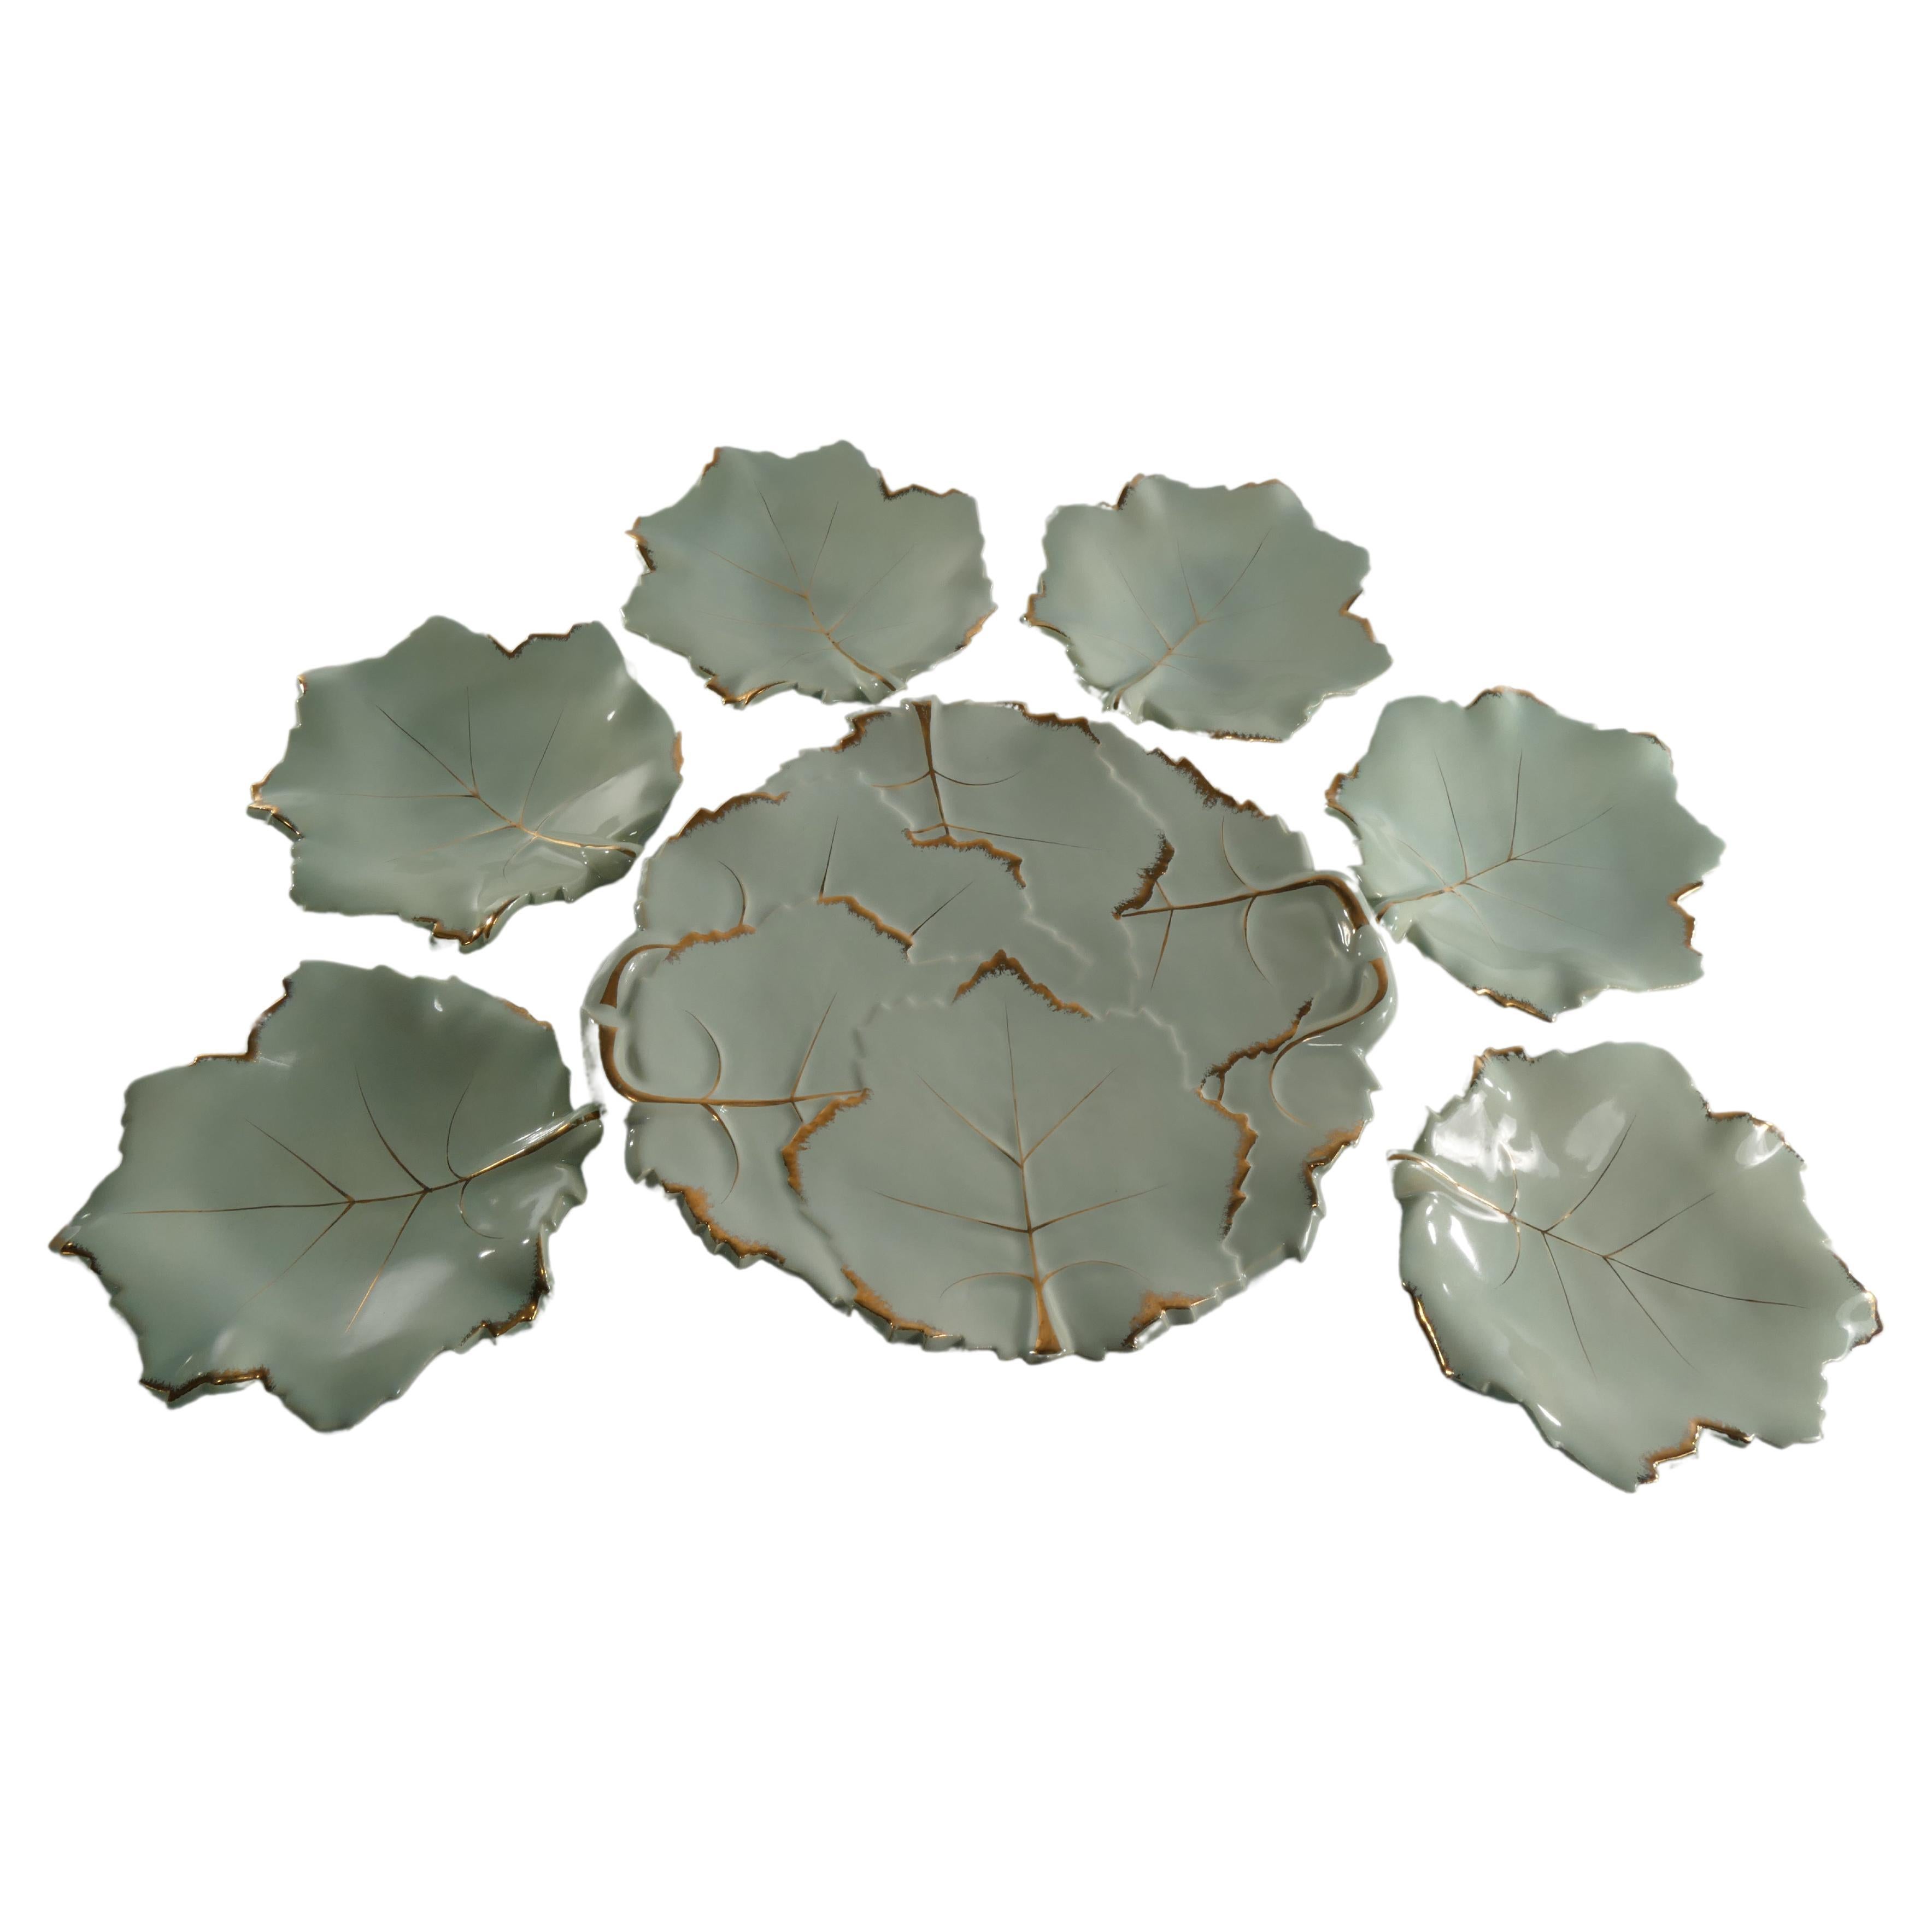 A set of 7 very rare art deco style pistachio color leaf plates with with gold accents from Viloca Paris Caffarelli. The 6 smaller plates constitutes of one leaf each. The larger plate constitutes of many leaves with apparent relief effects